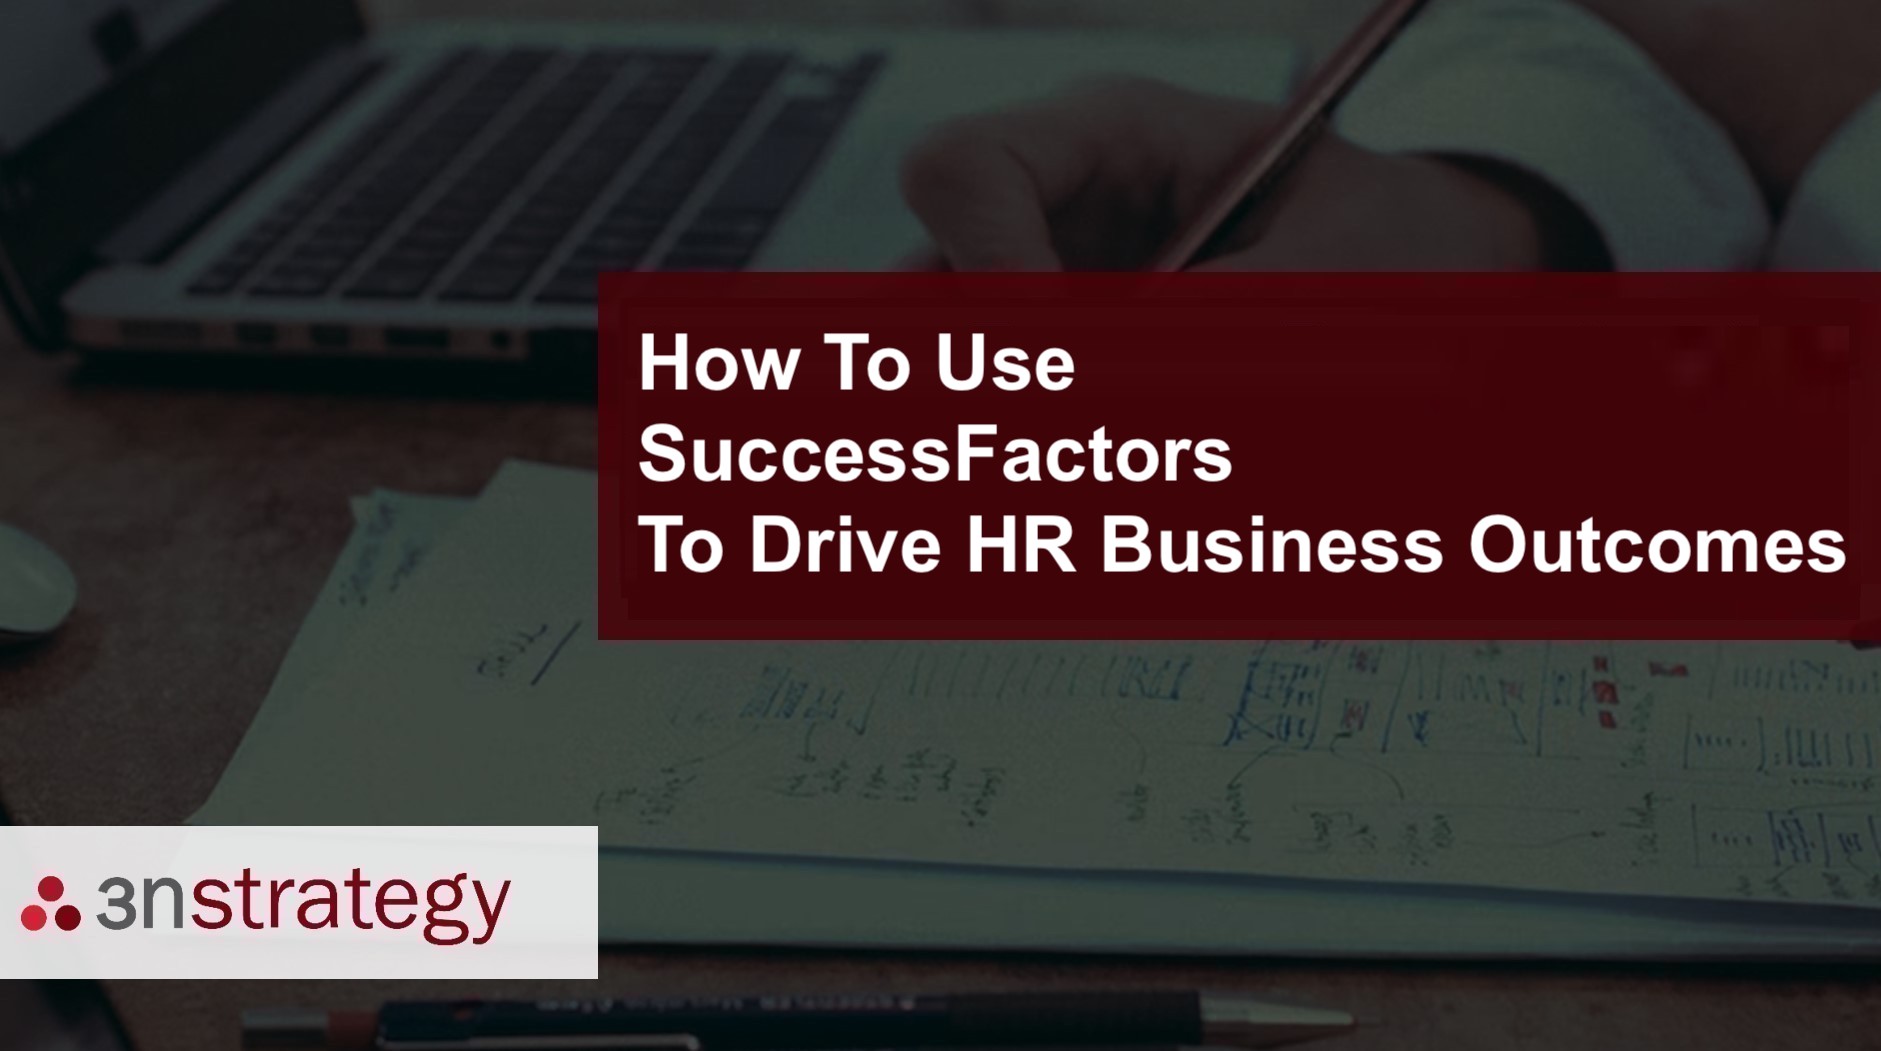 HR Business Outomces